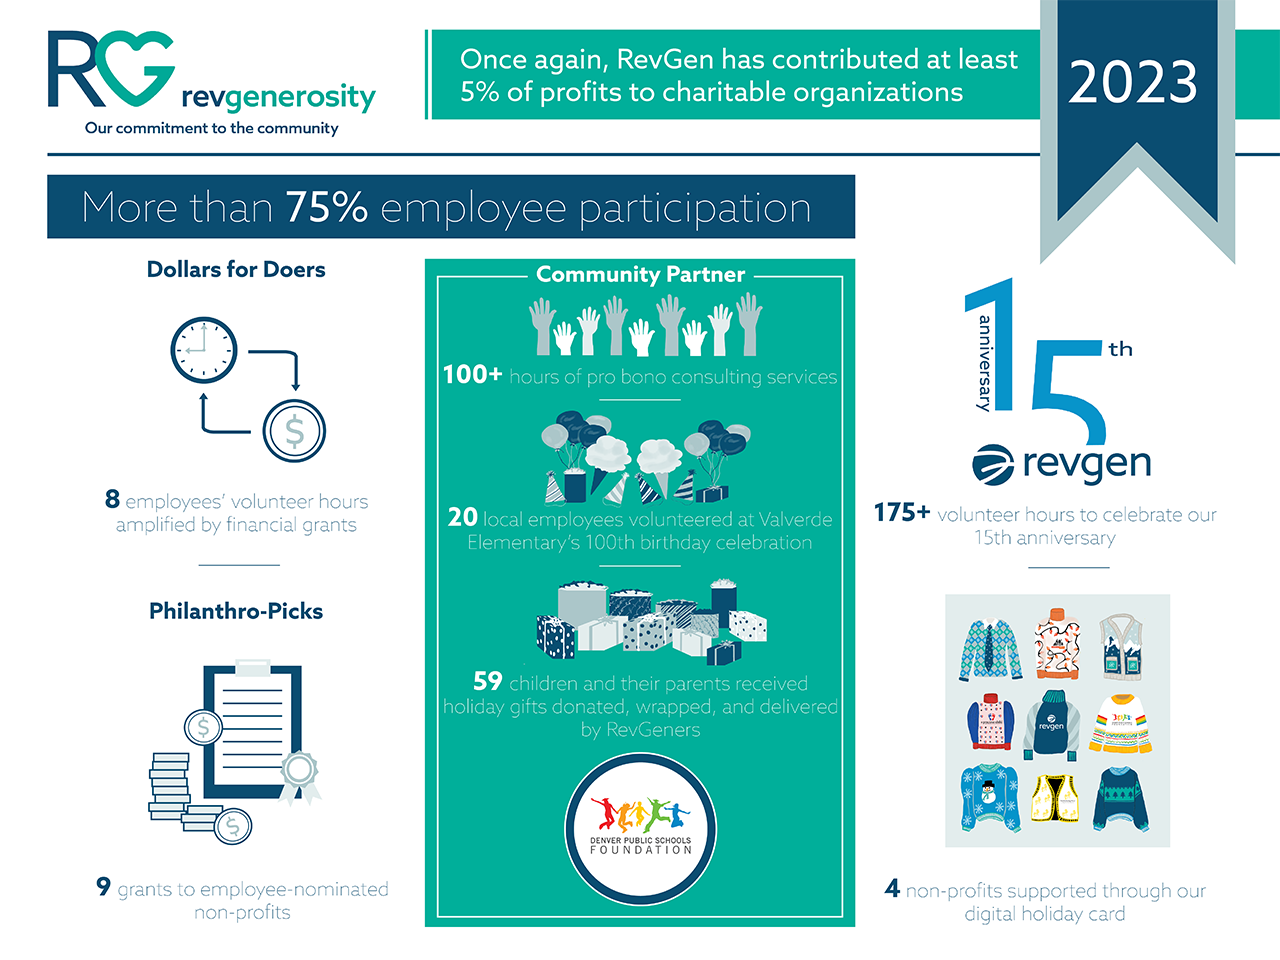 An infographic detailing the 2023 RevGenerosity charitable efforts.